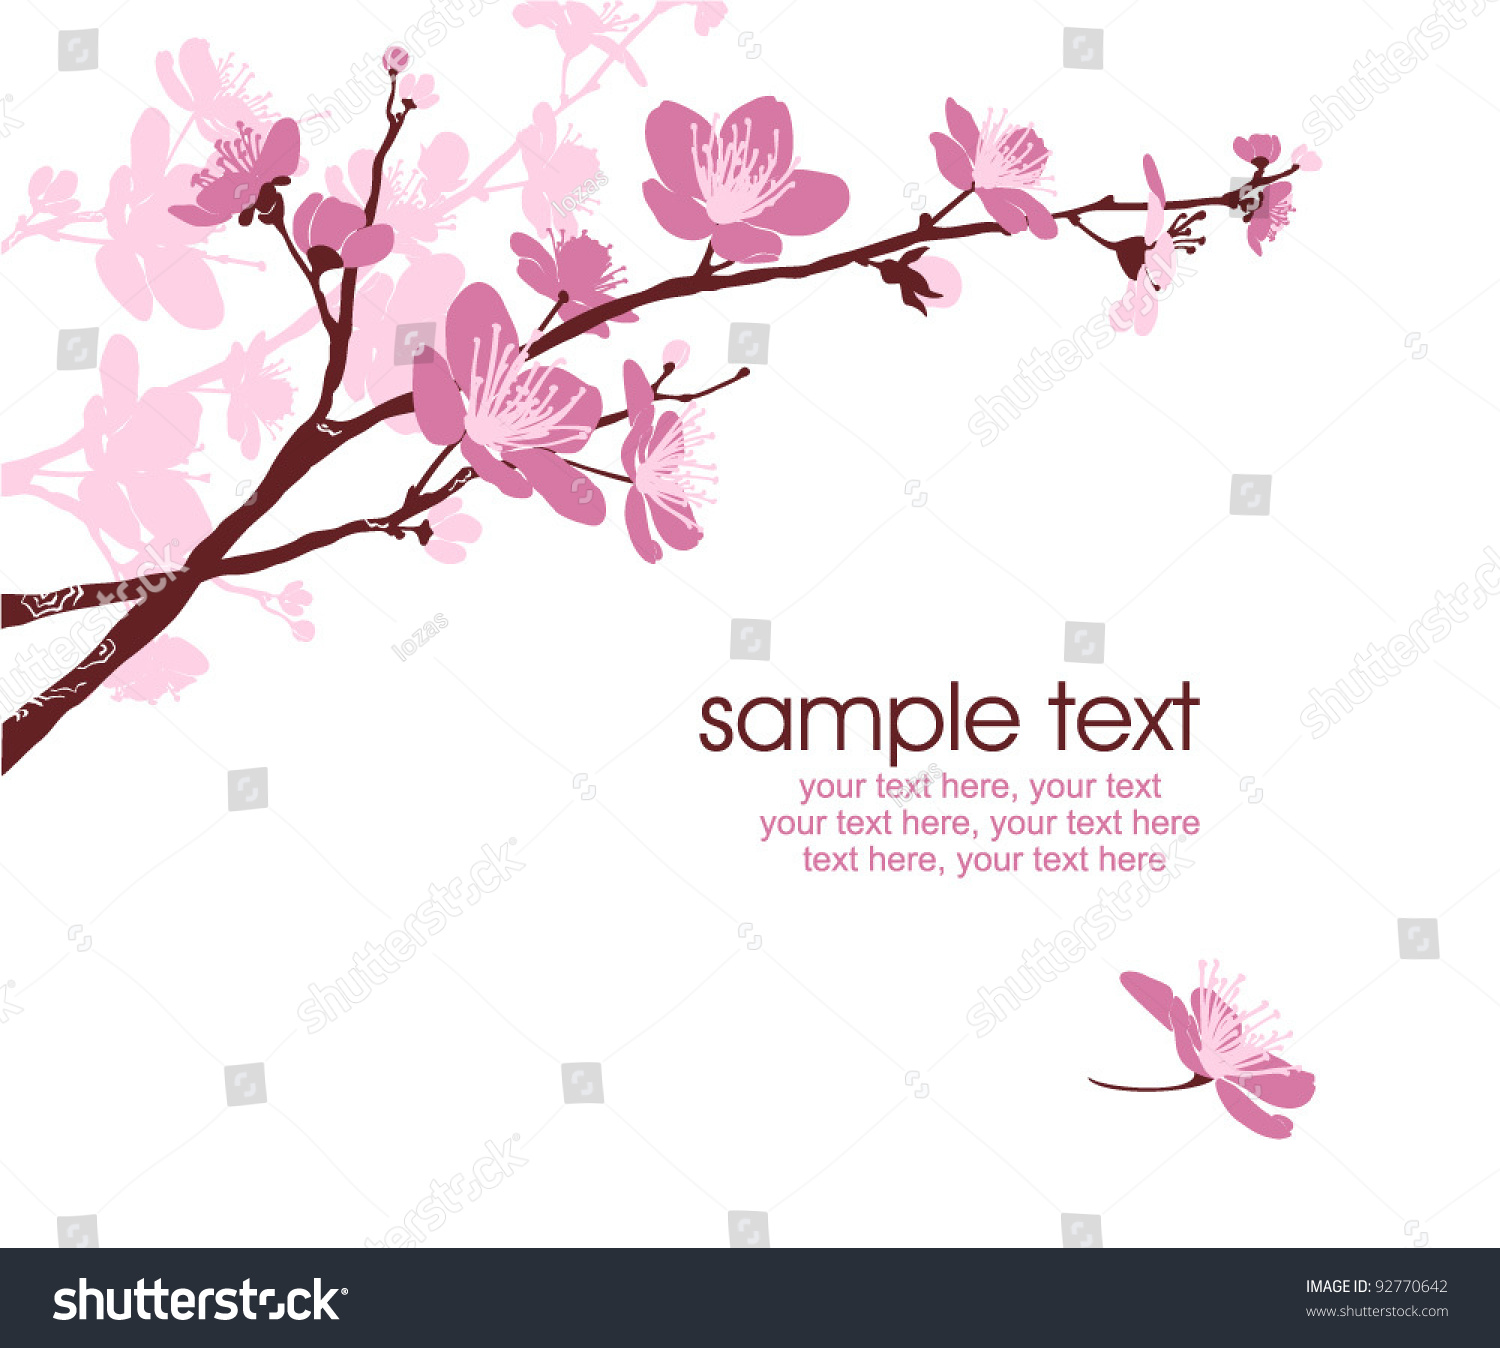 Card With Stylized Cherry Blossom And Text Stock Vector Illustration ...